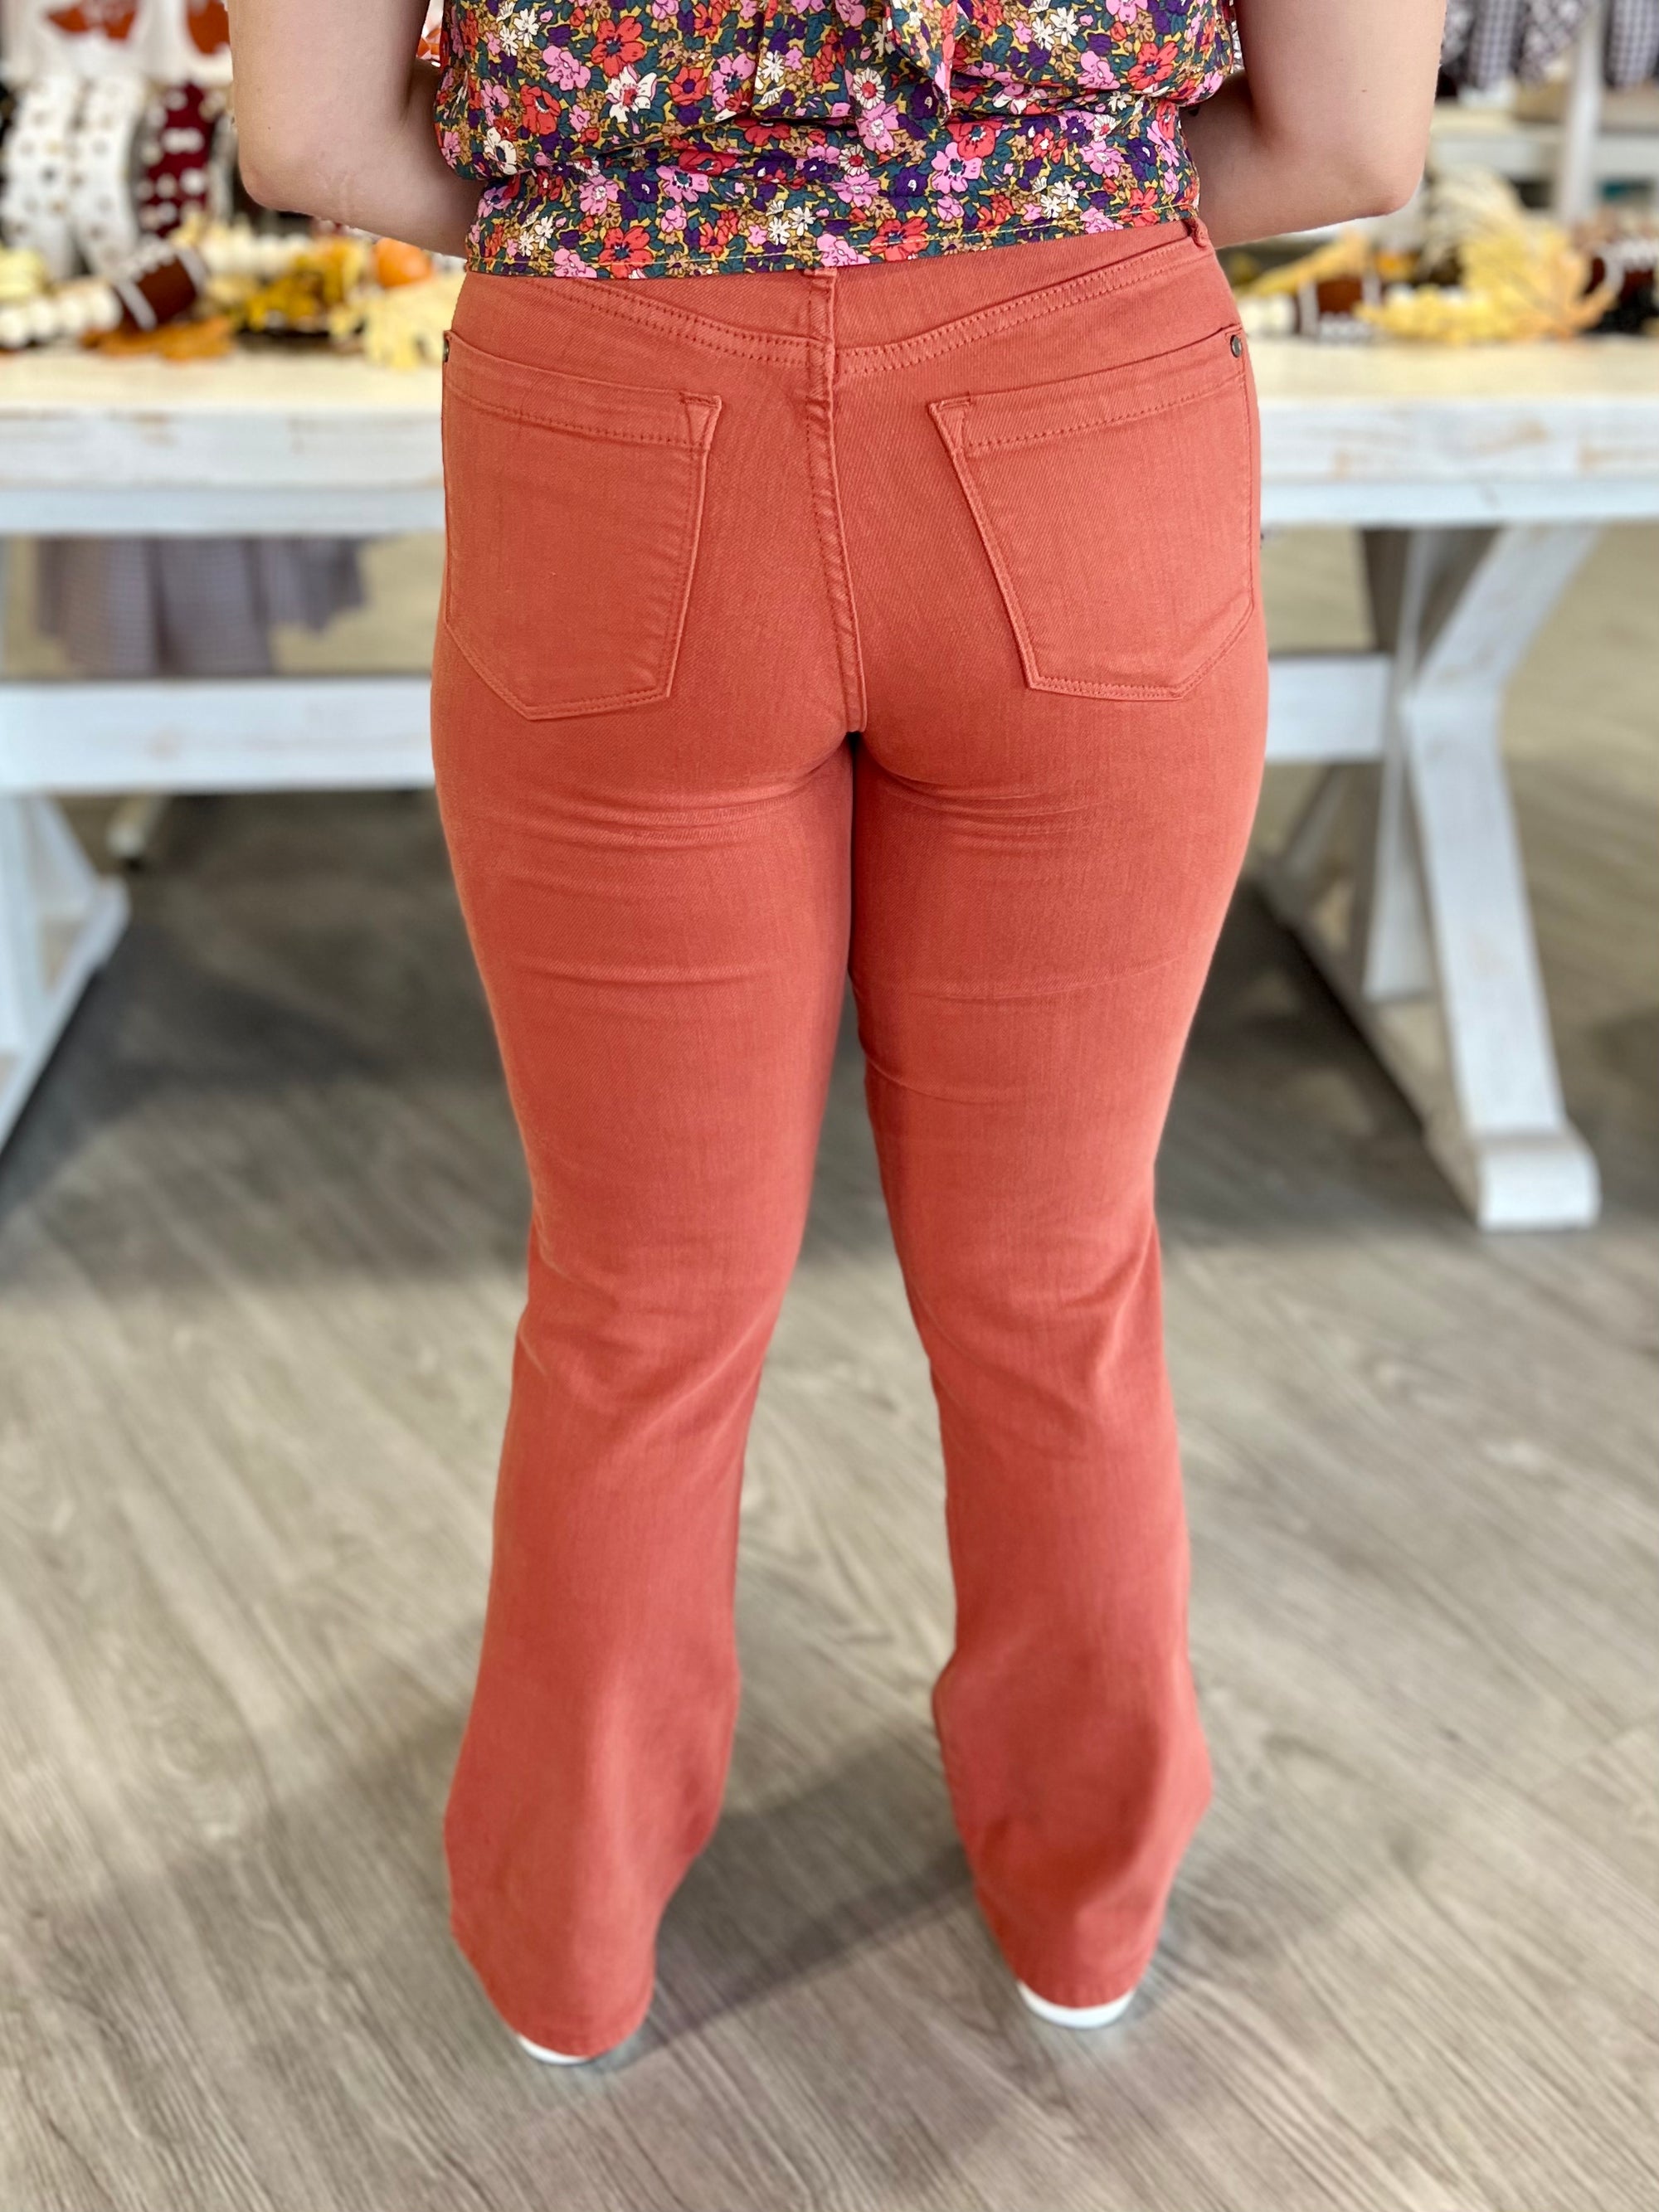 TERRACOTTA MID RISE JUDY BLUE JEANS